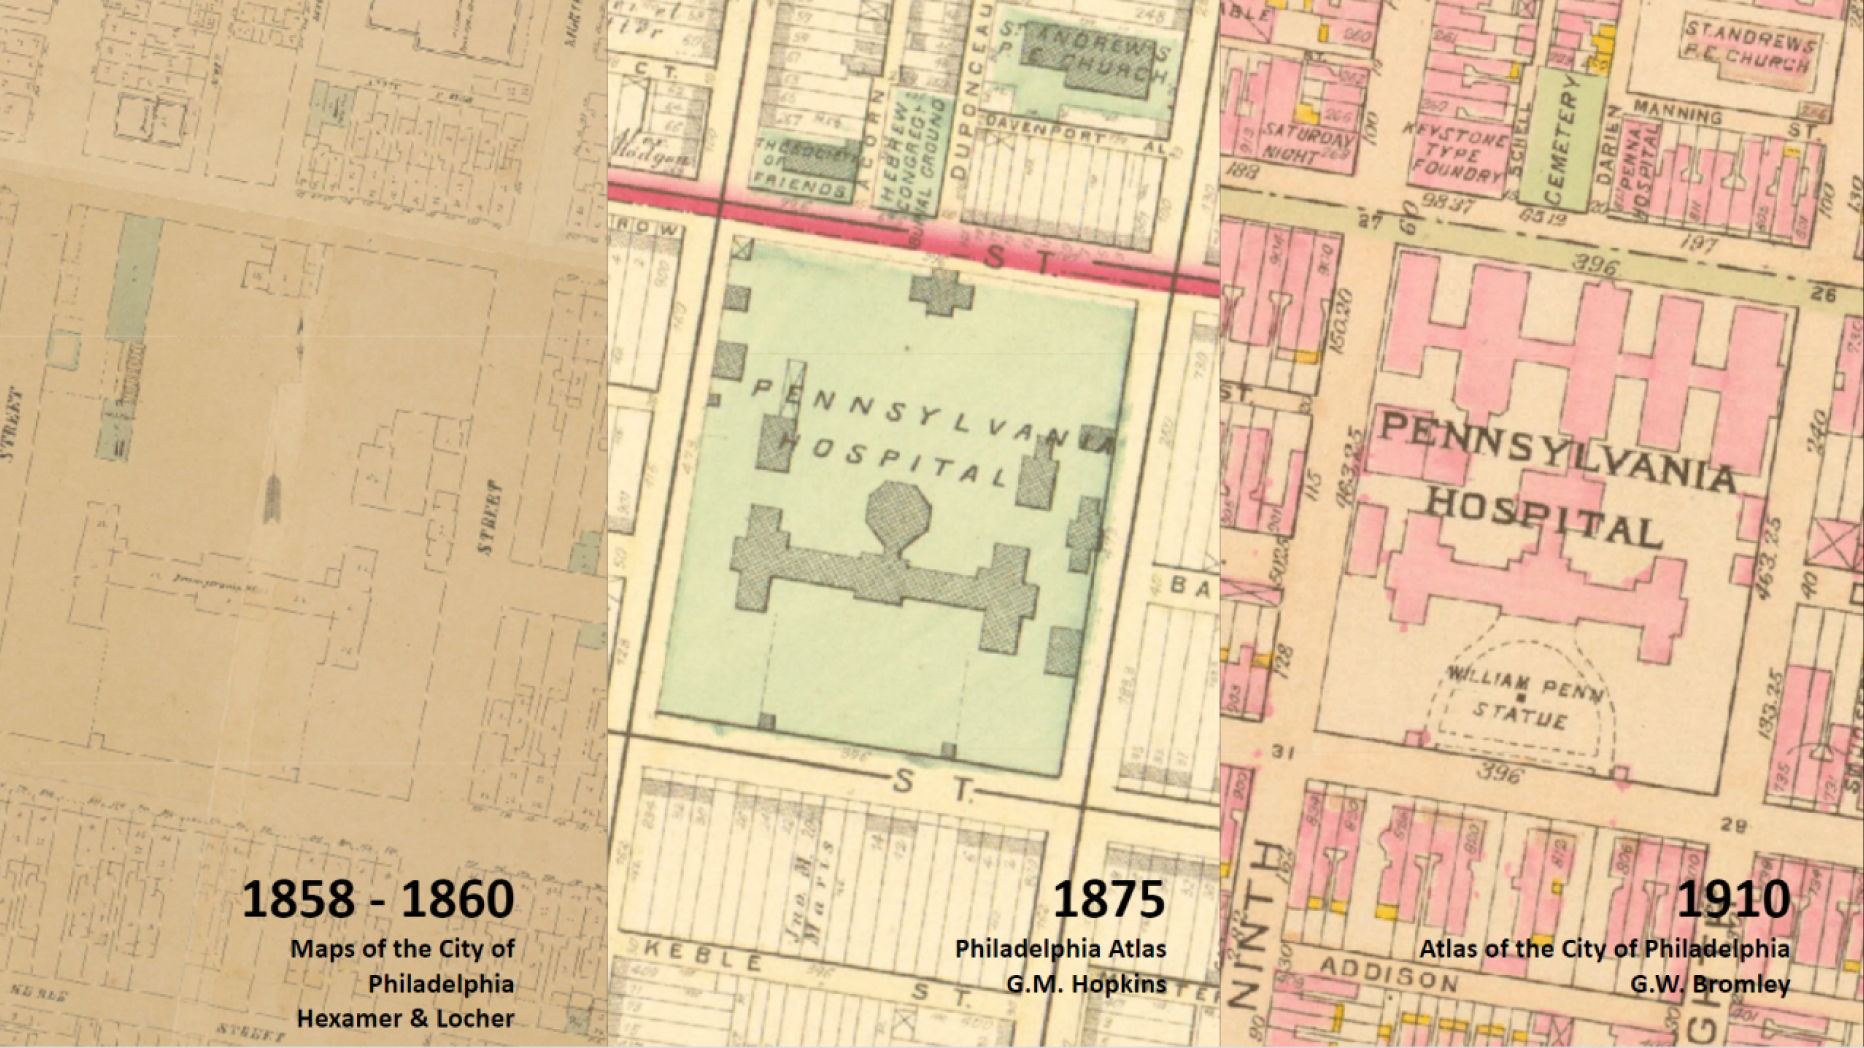 Three maps show the change of the site from 1858-1910. 